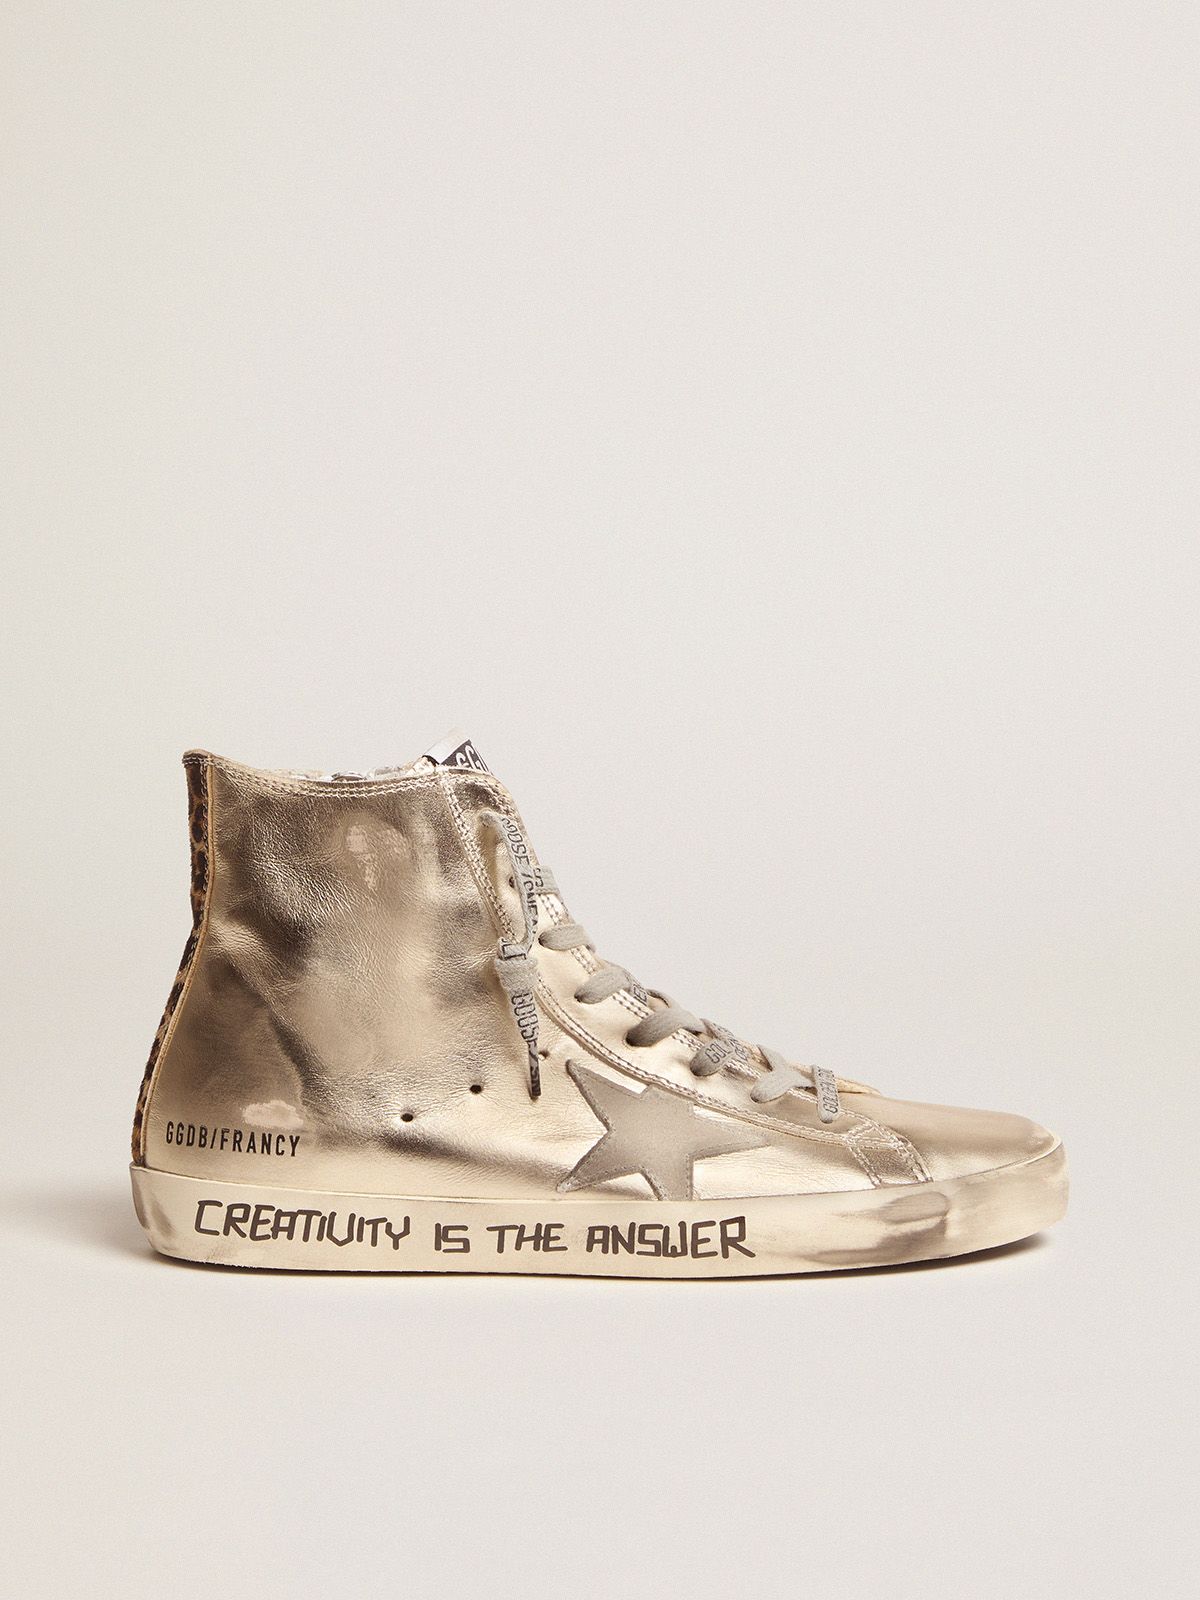 Gold Francy sneakers with handwritten lettering and leopard-print detail | 